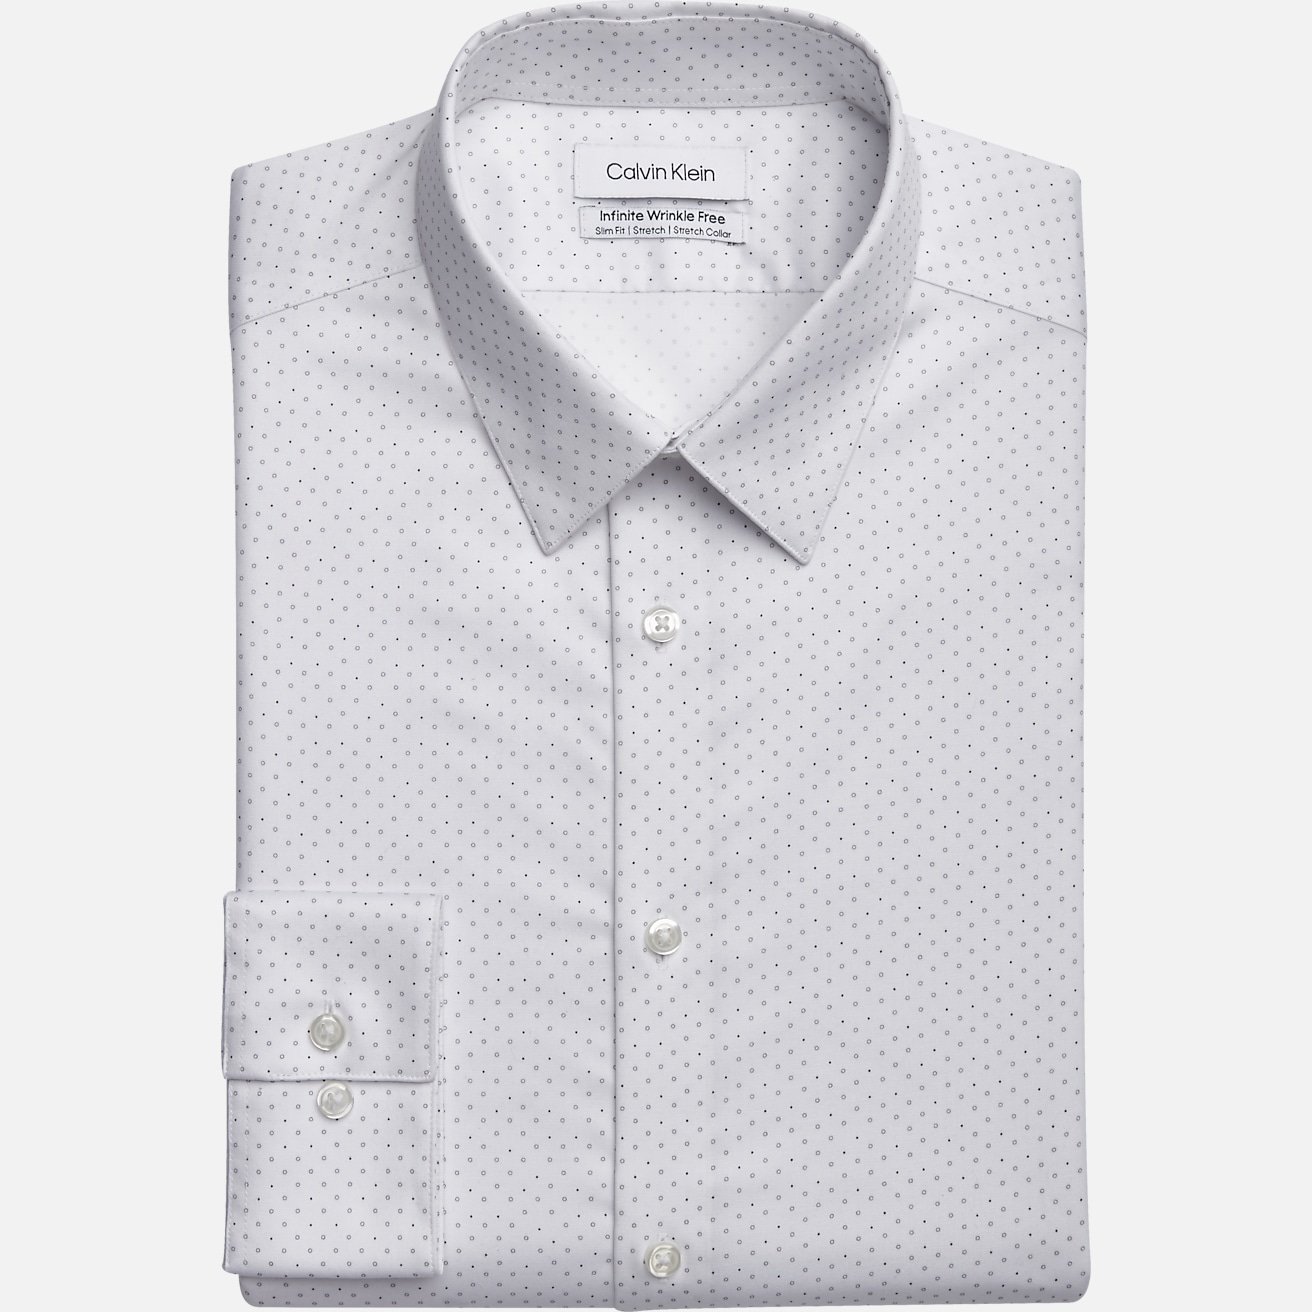 How far is the top of the printable area from the shirt collar?